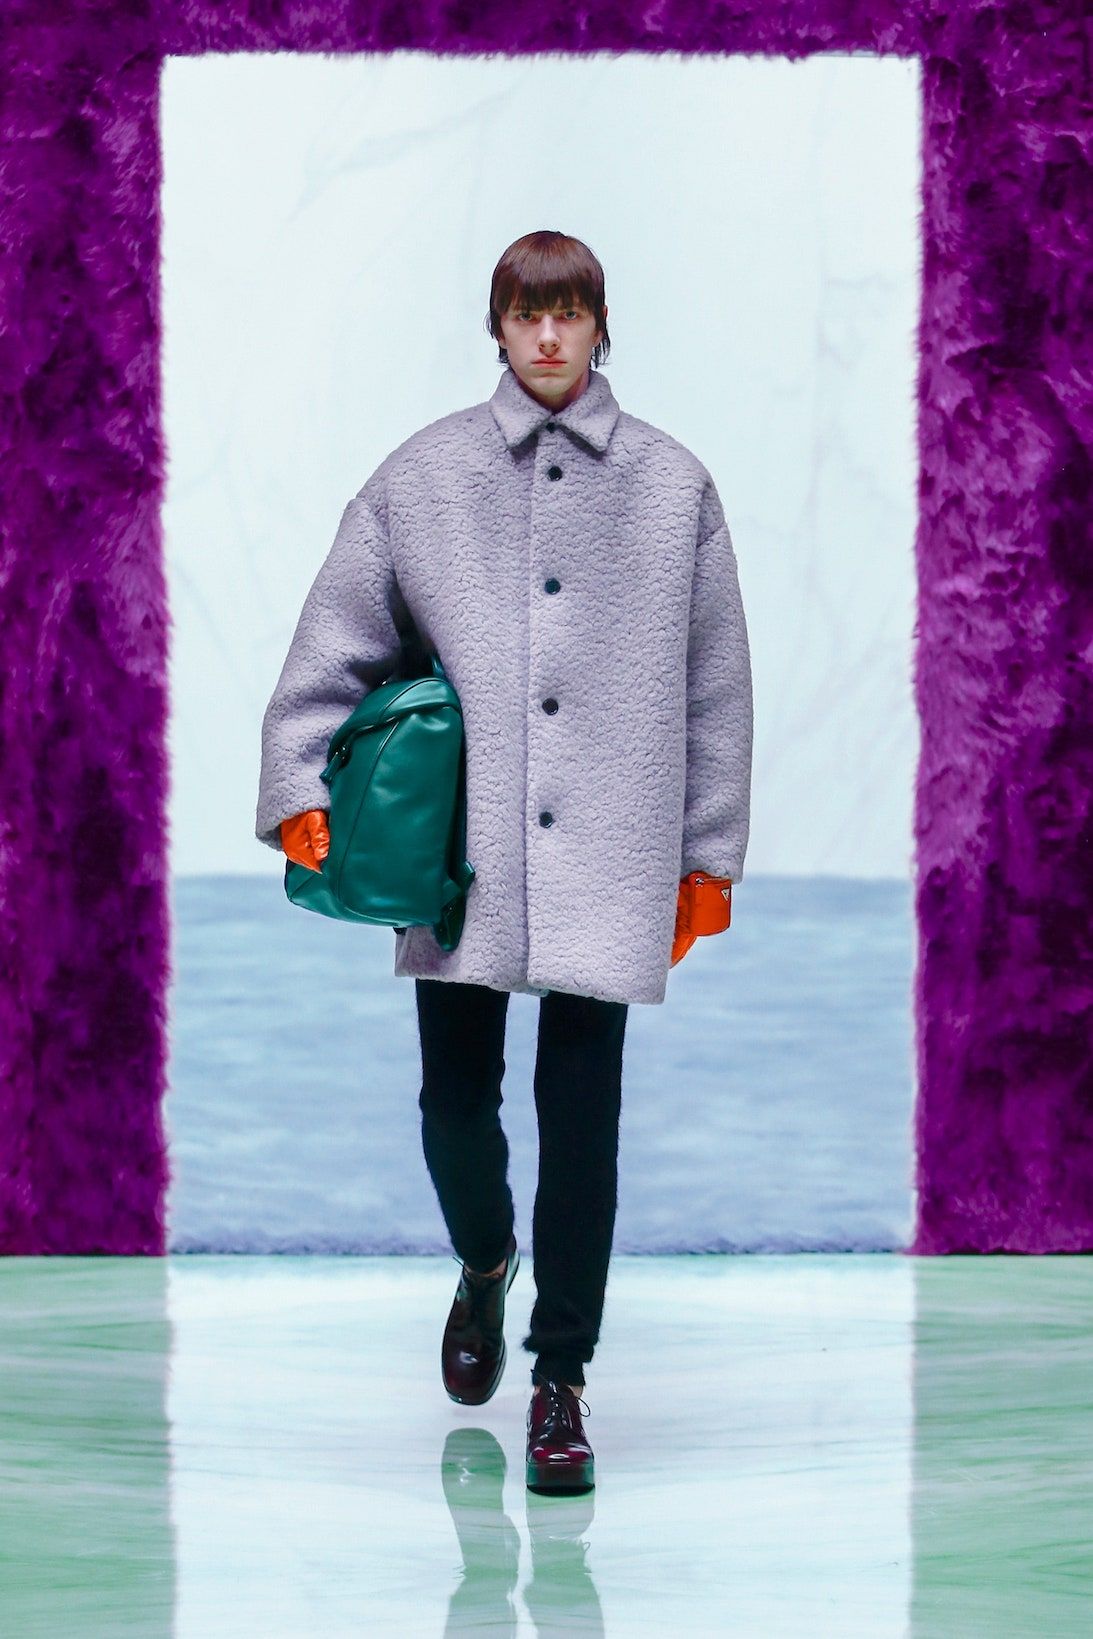 Prada FW21: the best pieces from Raf Simons' first menswear collection